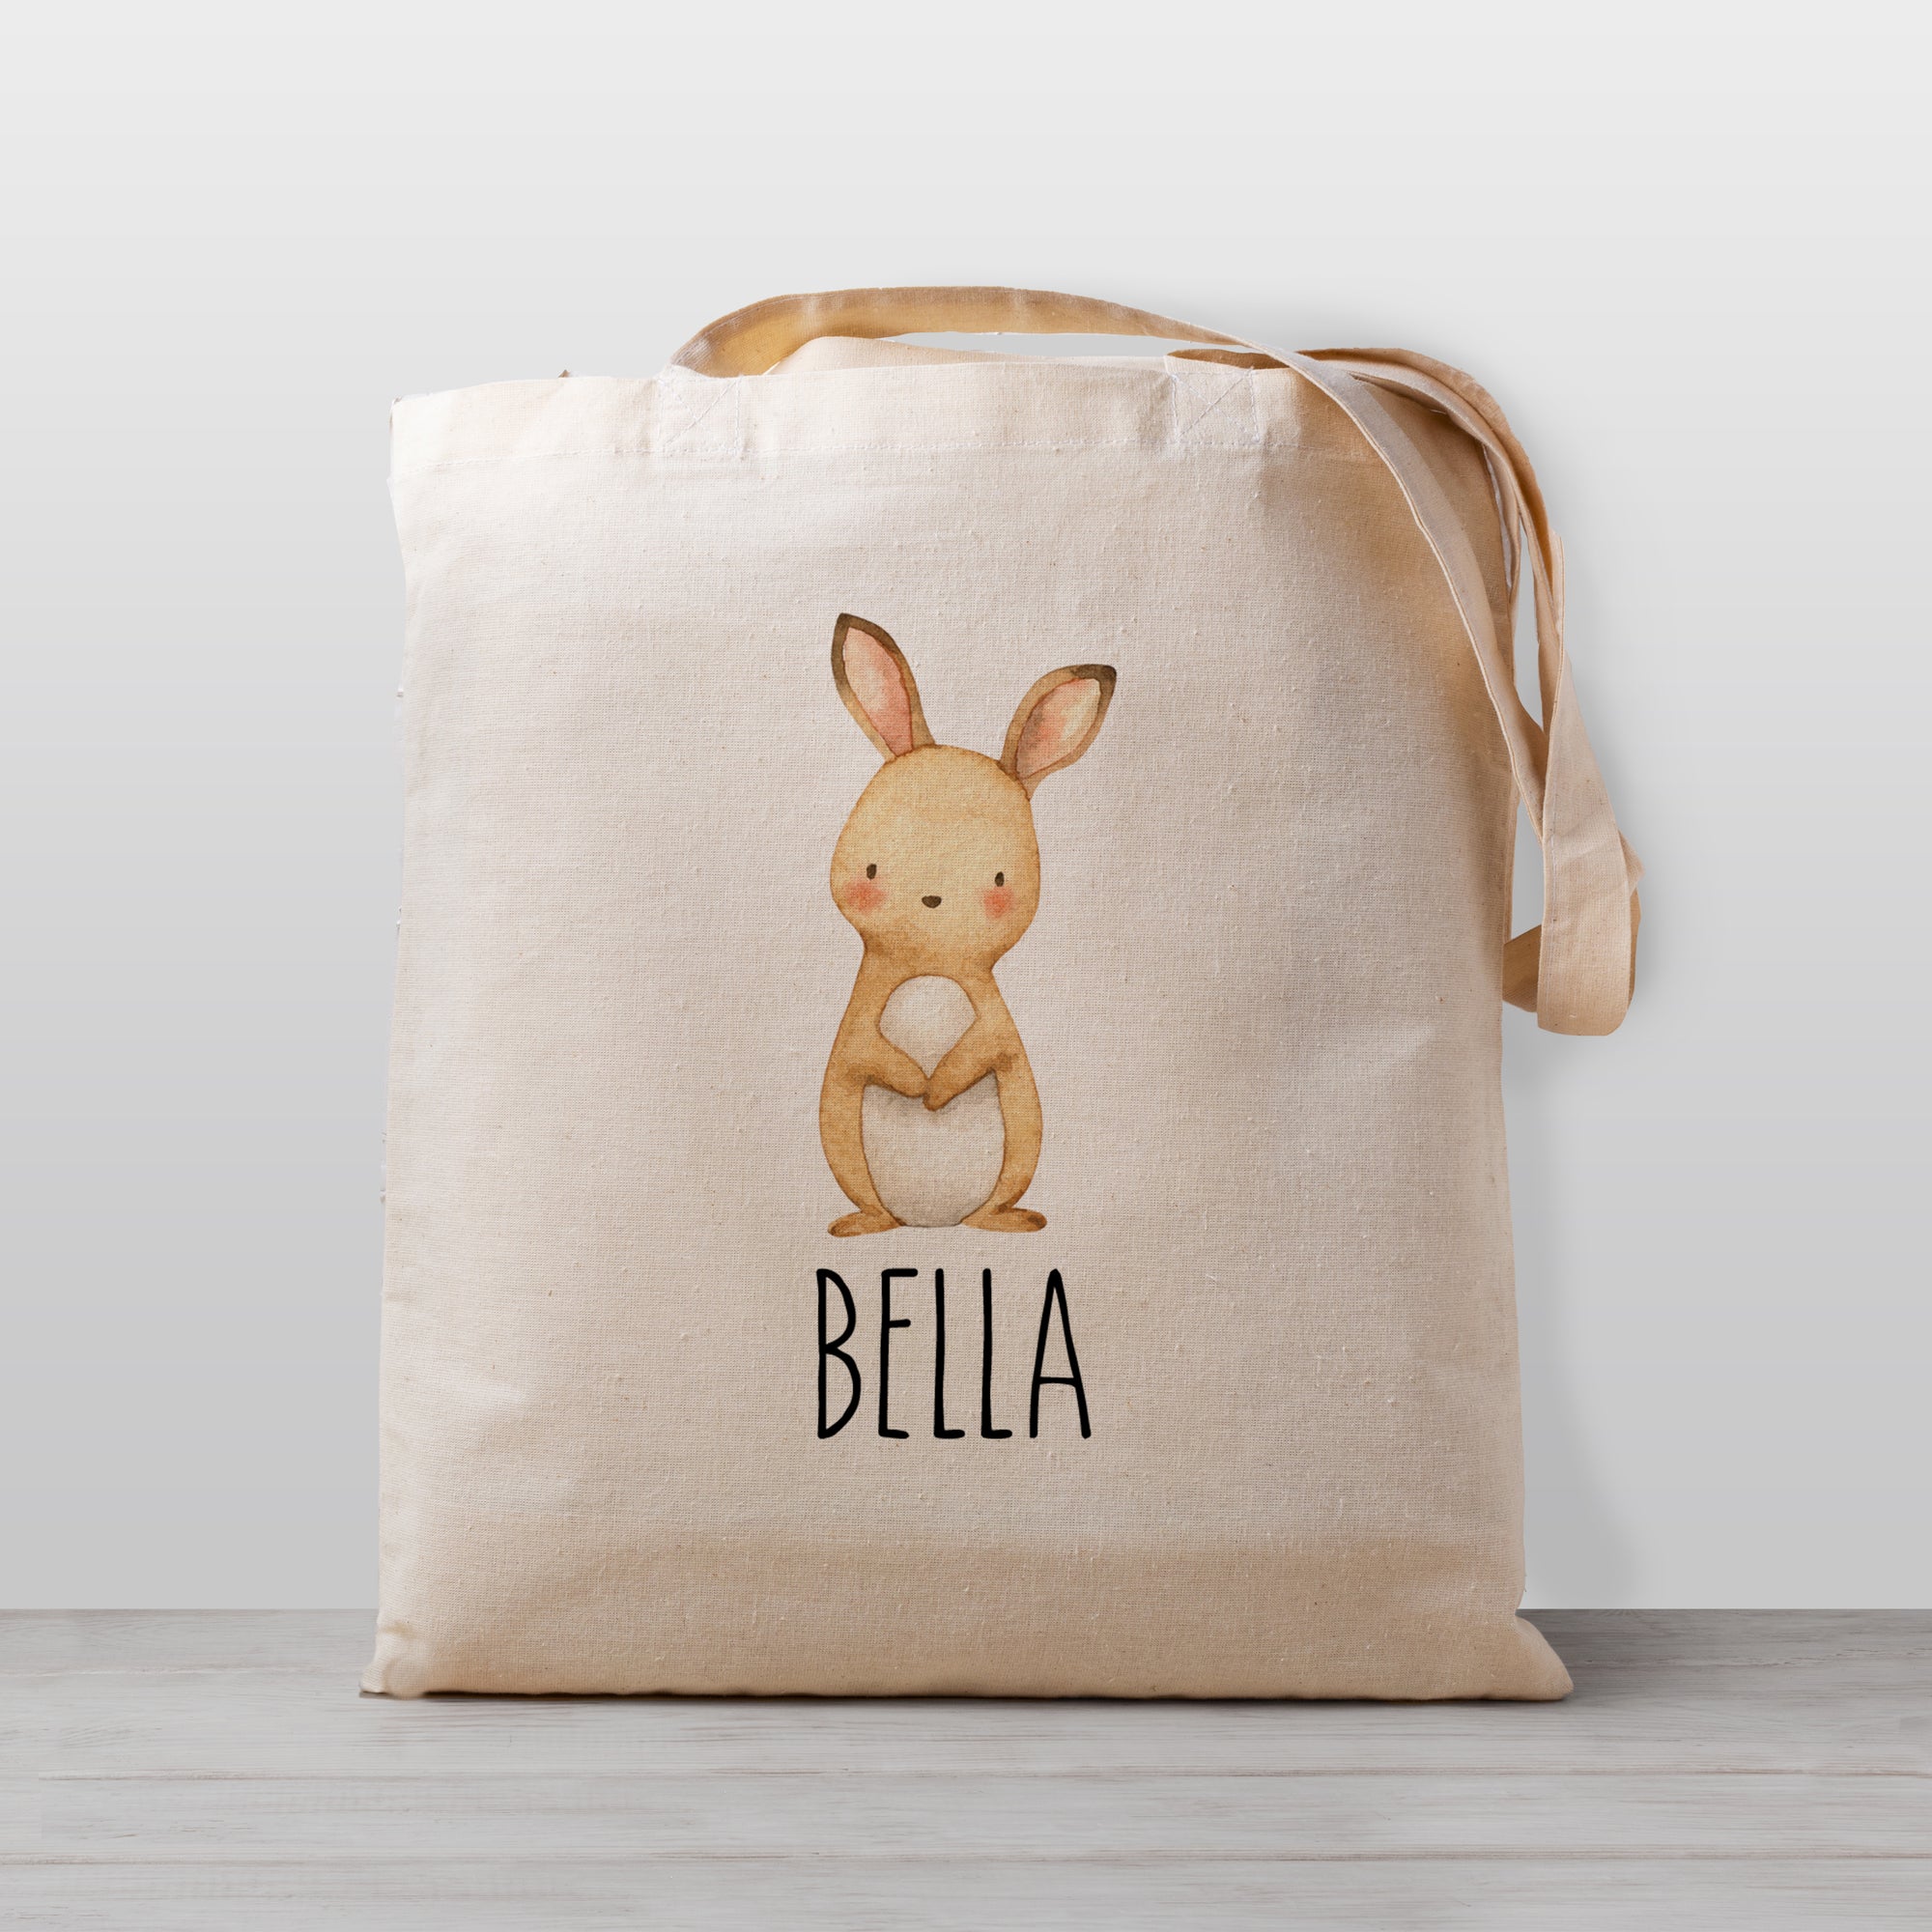 Bunny Rabbit Personalized Tote Bag, 100% Natural Cotton Canvas